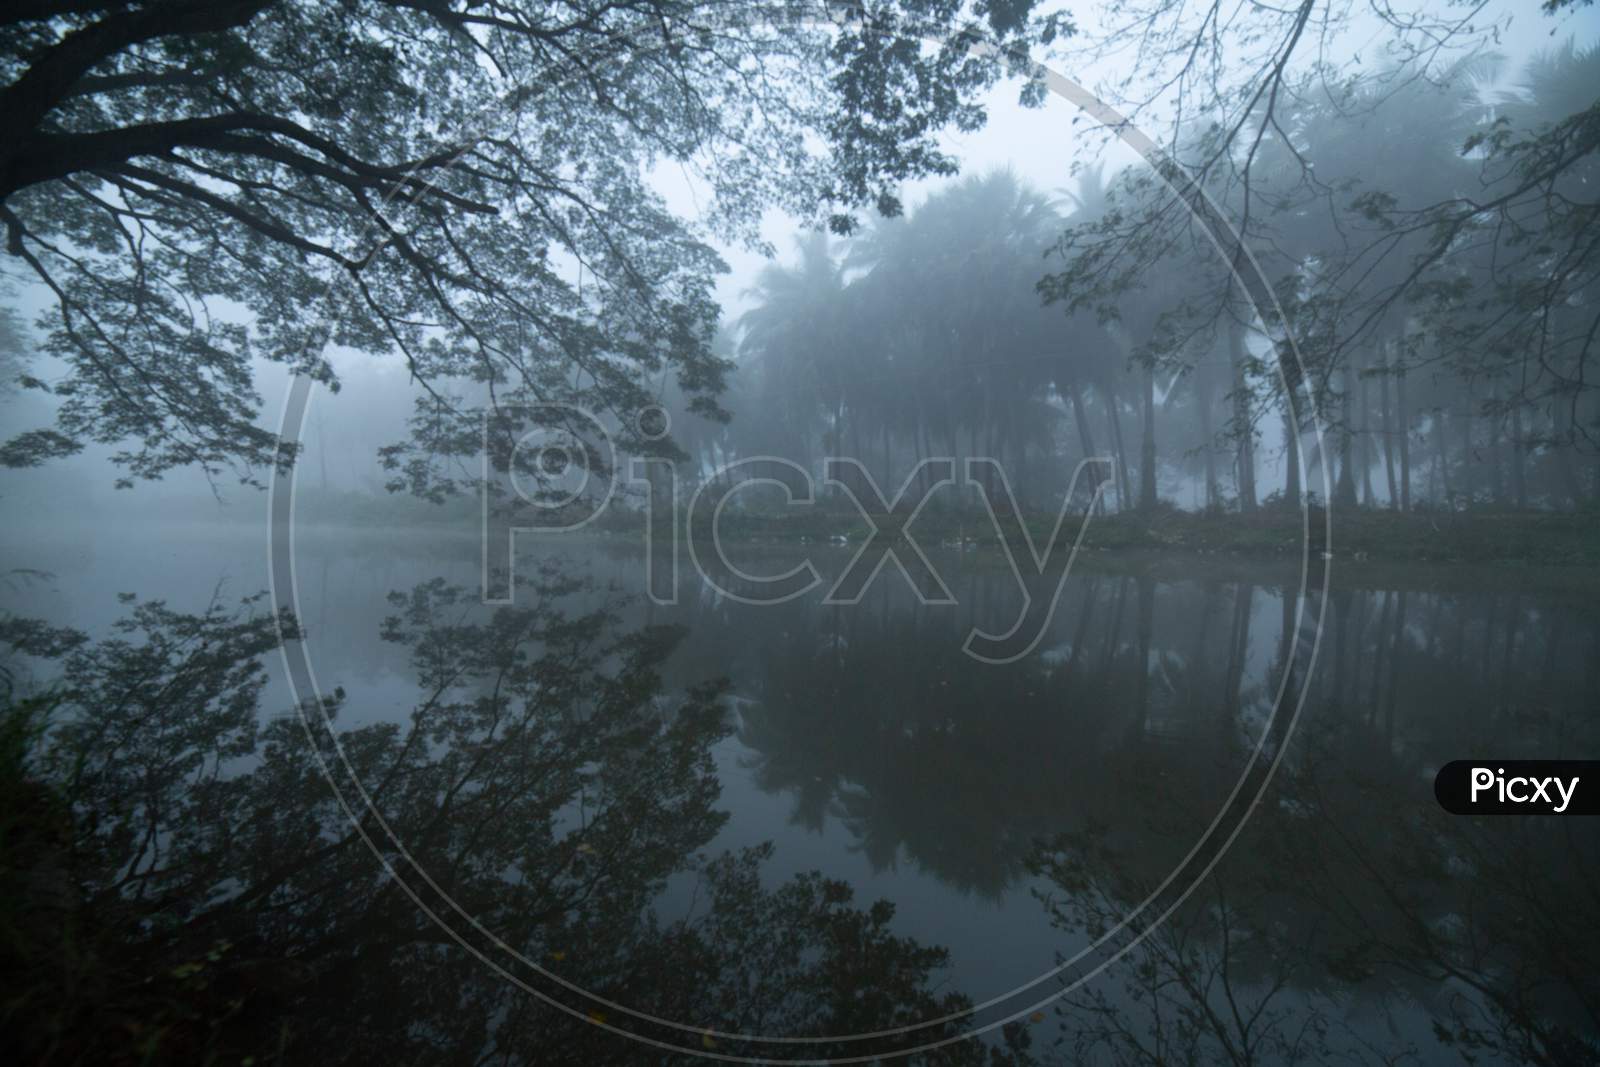 View of coconut trees during heavy fog